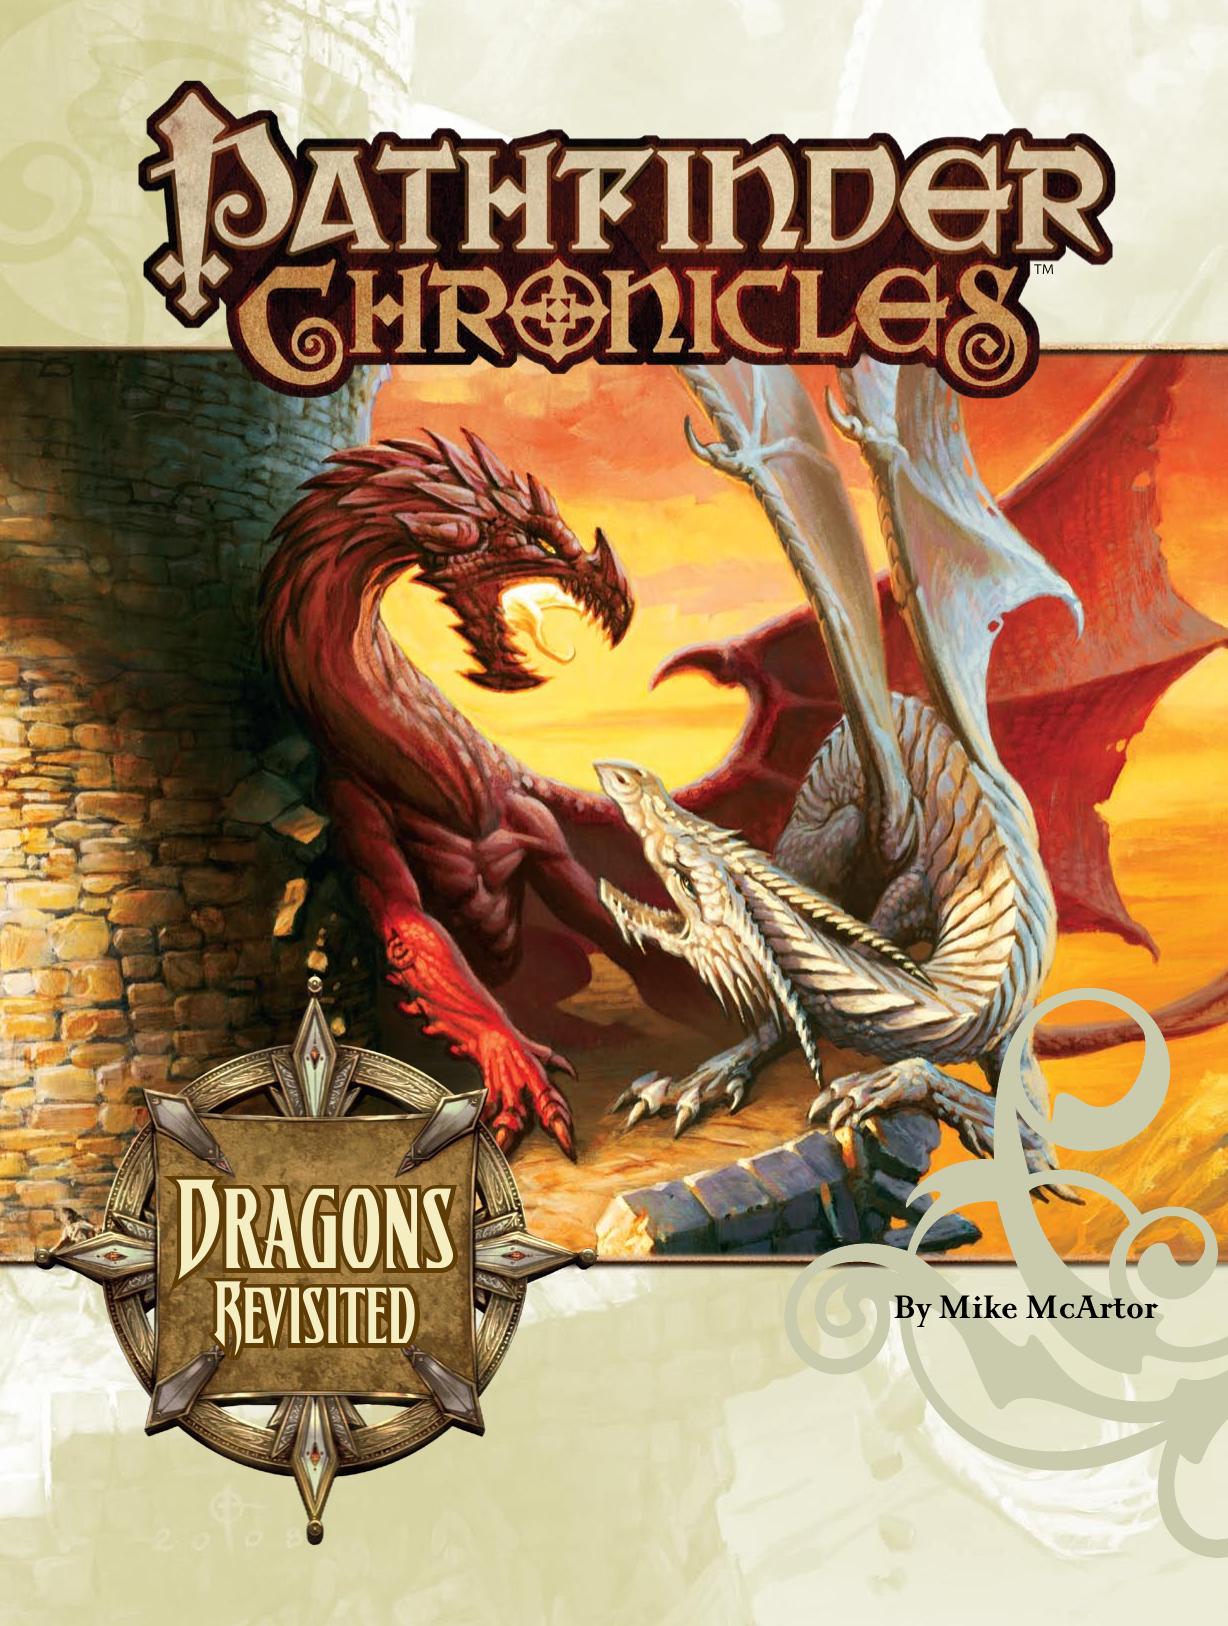 Pathfinder Chronicles: Dragon Revisited